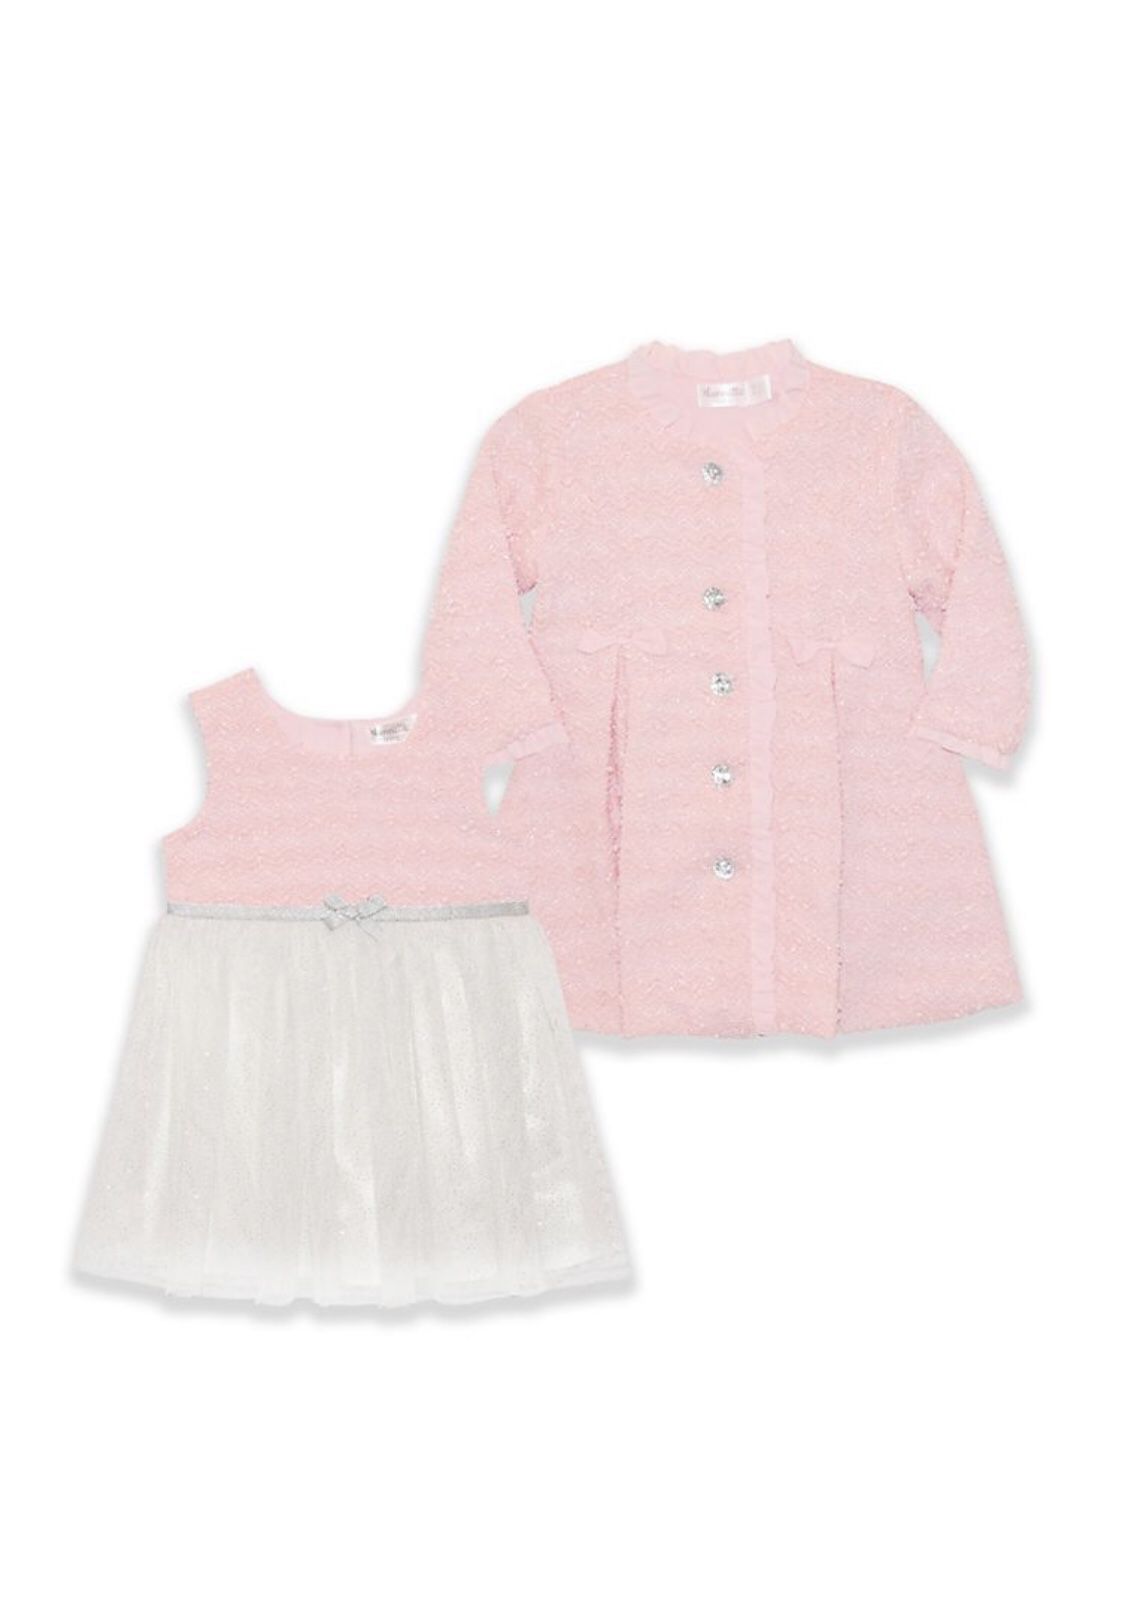 Nannette Baby Girl Dress 2-Pieces Glitter Dress And Coat 